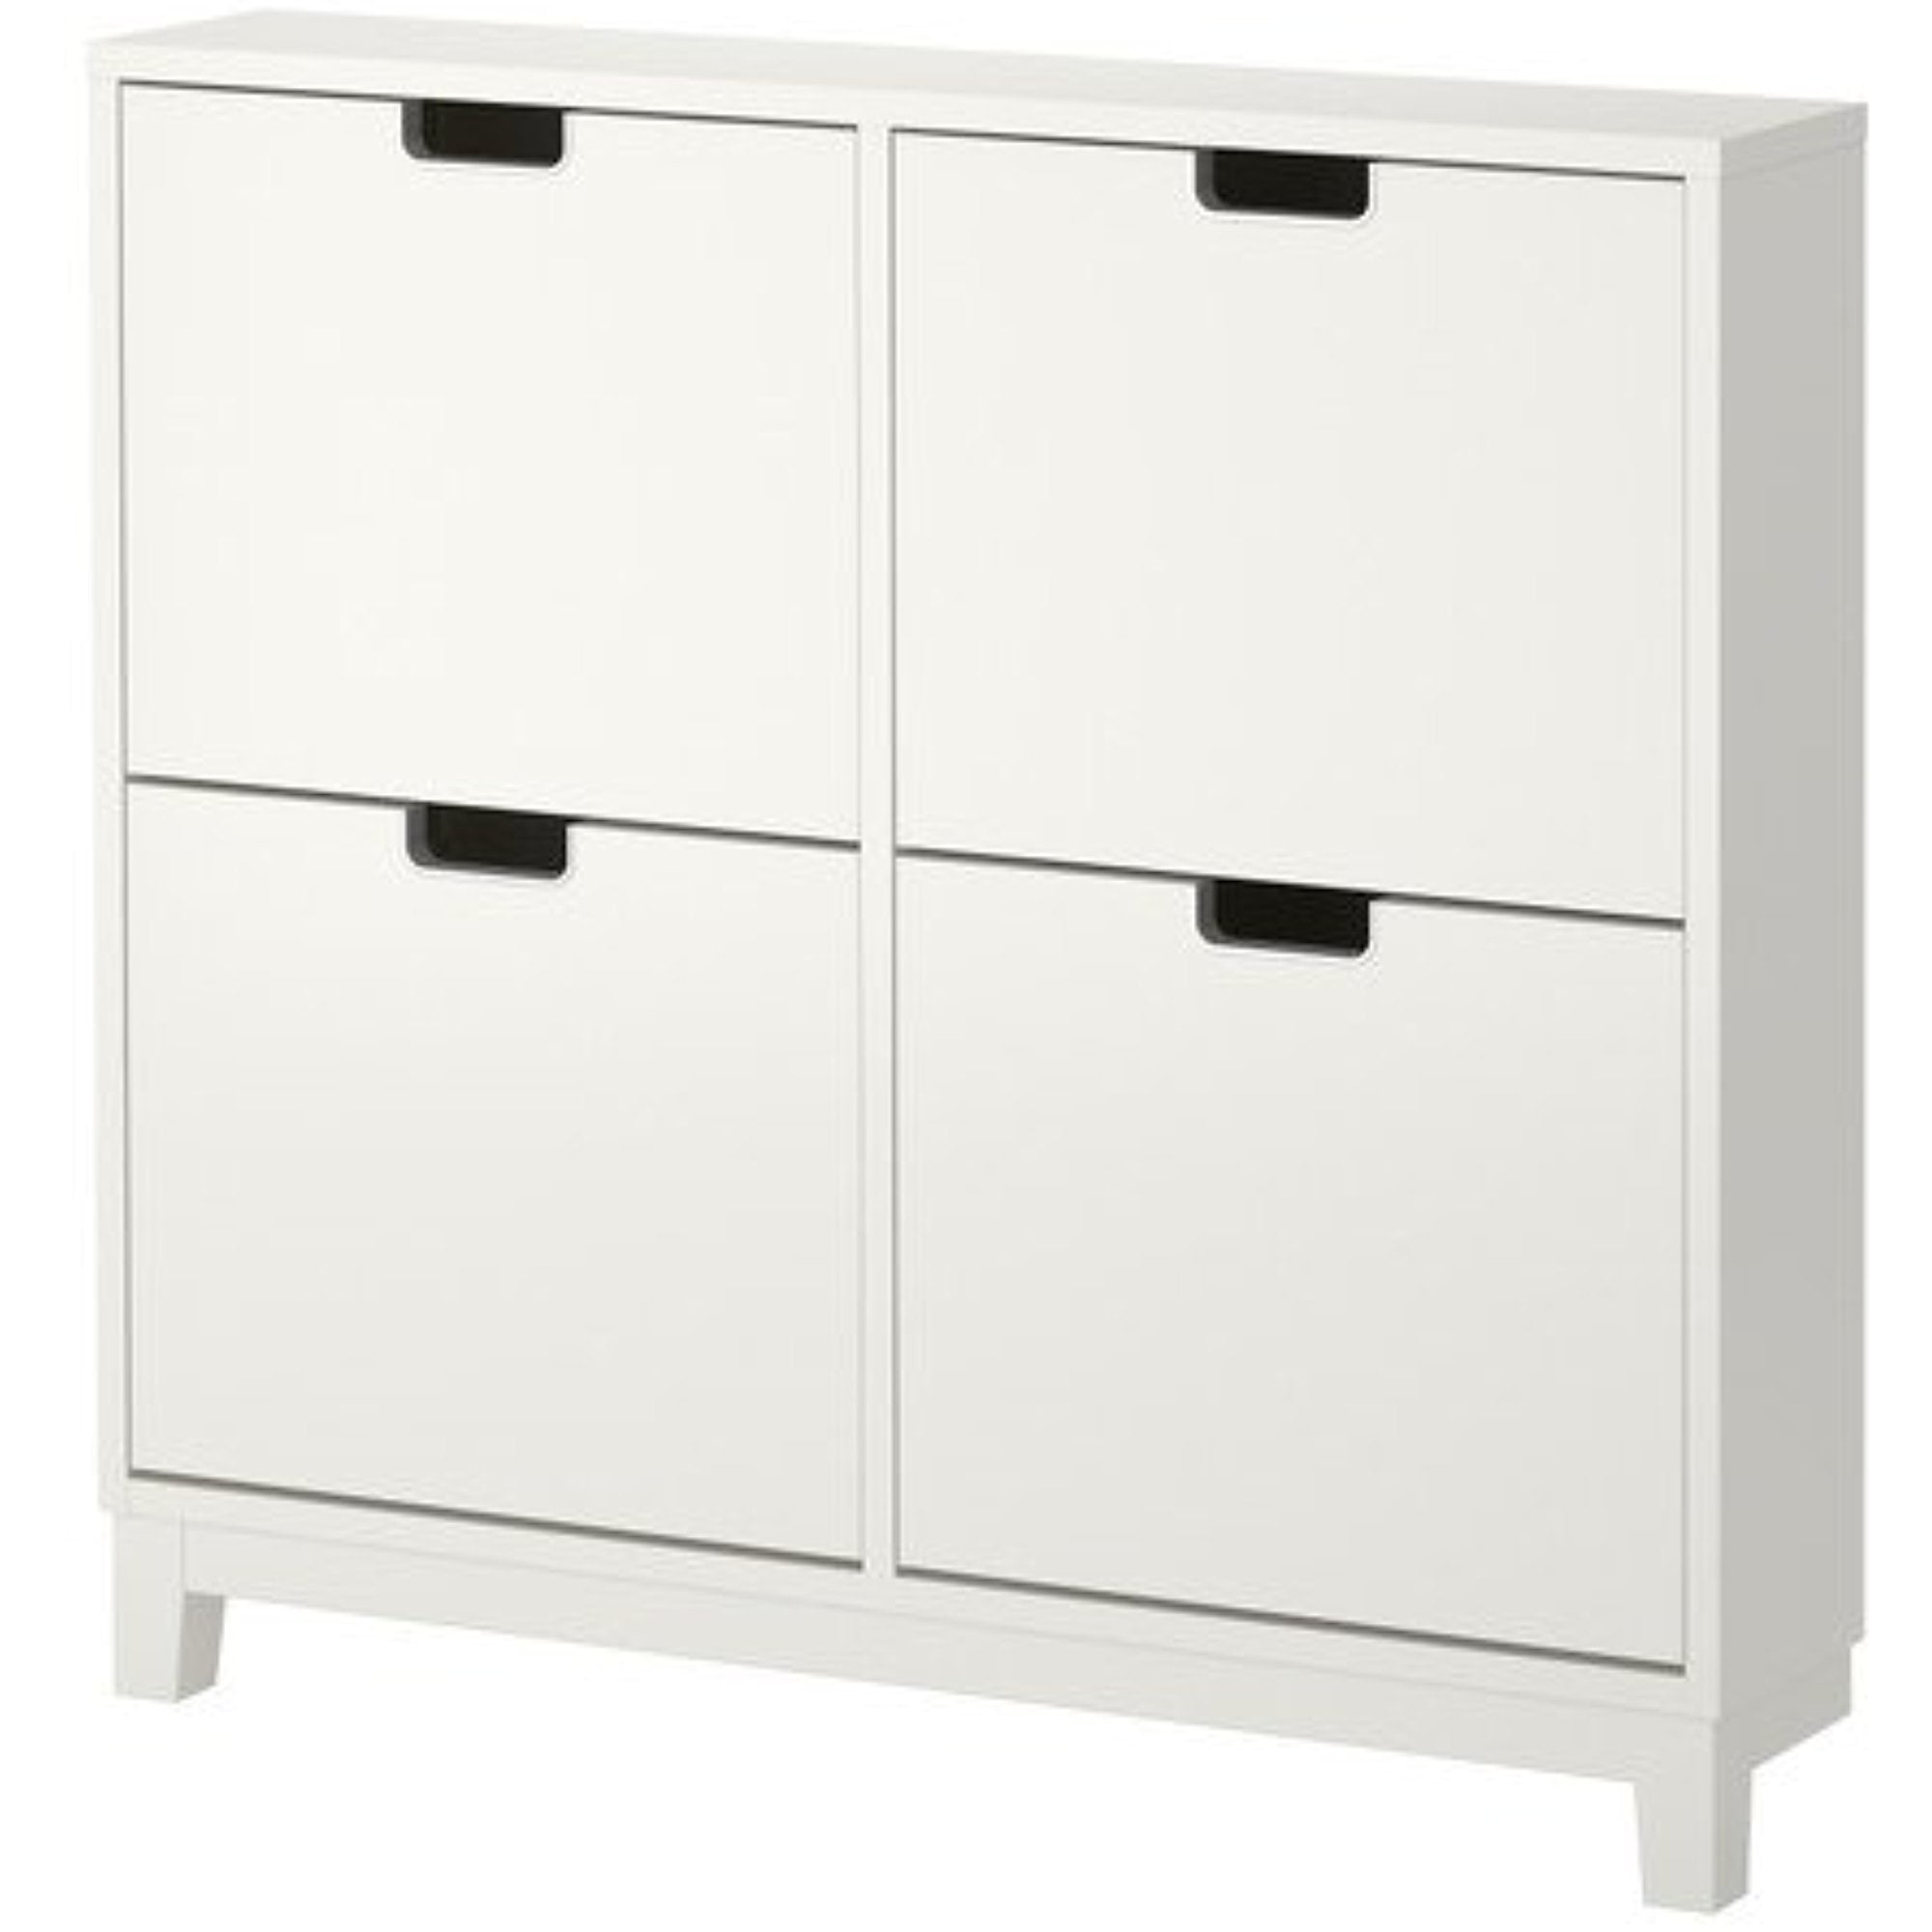  Ikea ST LL Shoe cabinet  with 4 compartments white 3026 